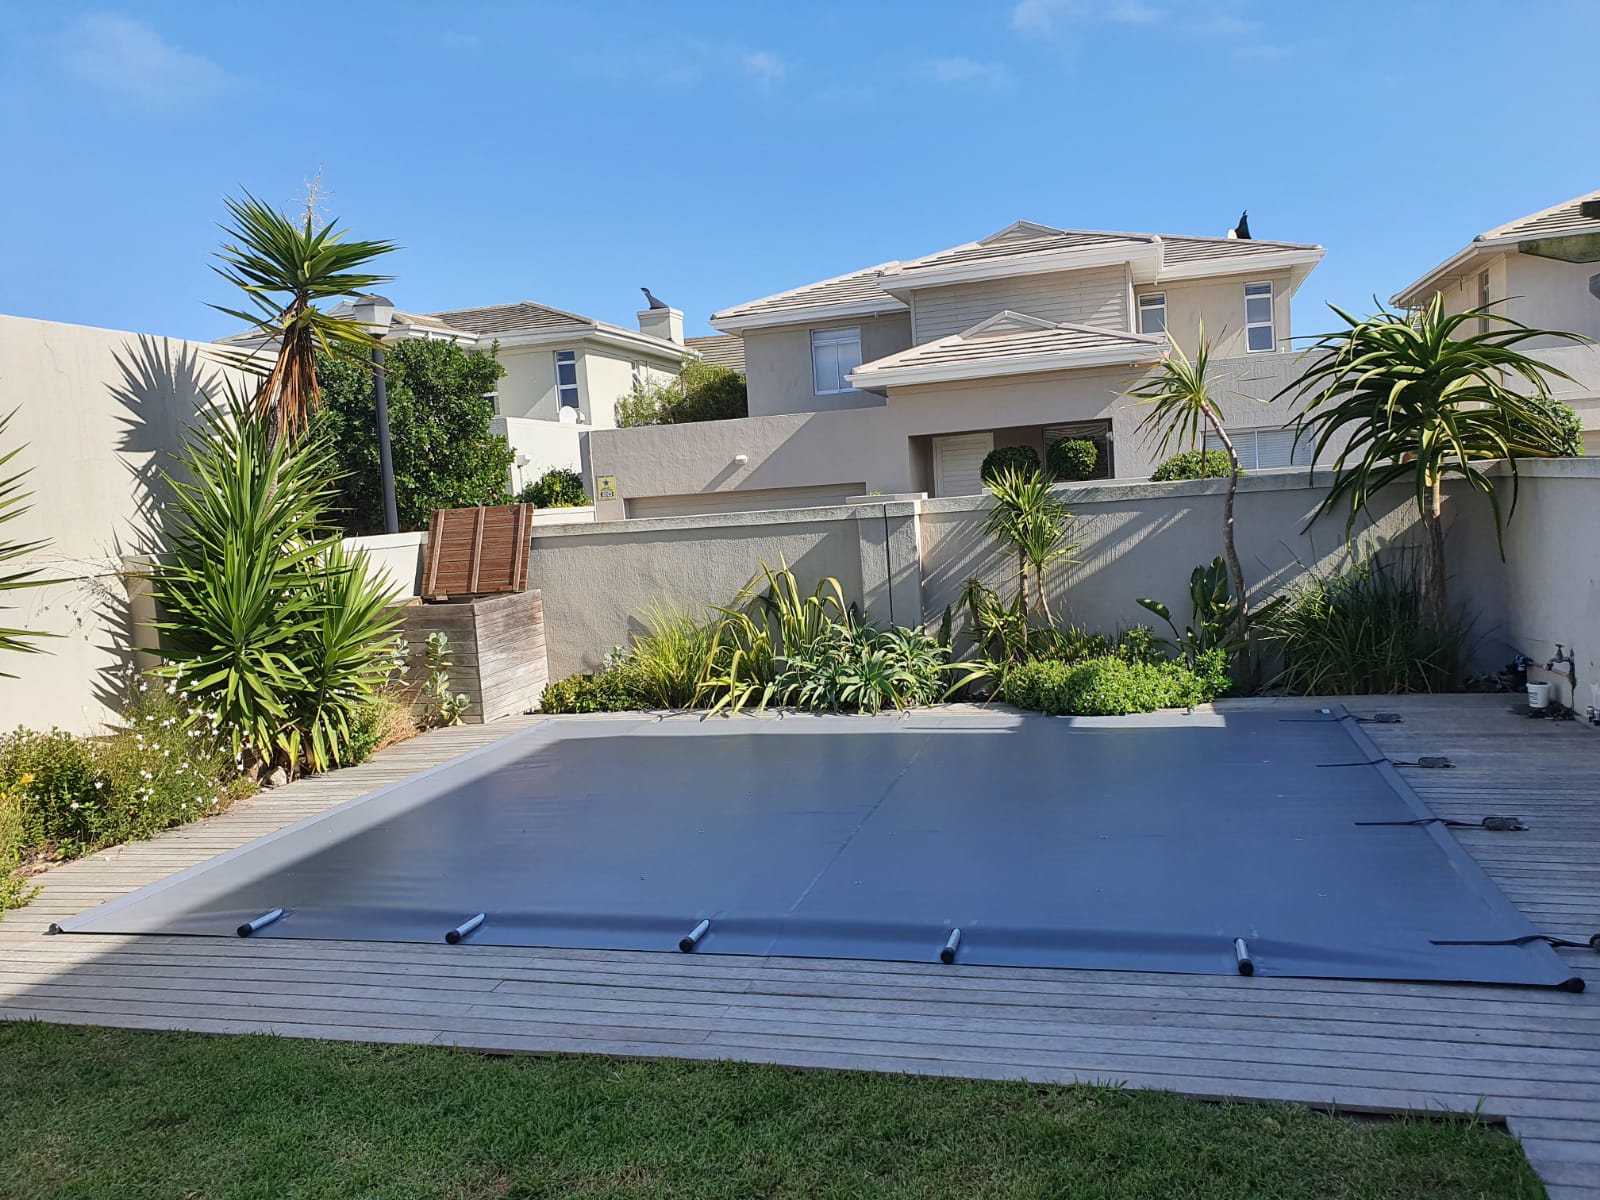 The Advantages and Disadvantages of Different Materials for Pool Covers 